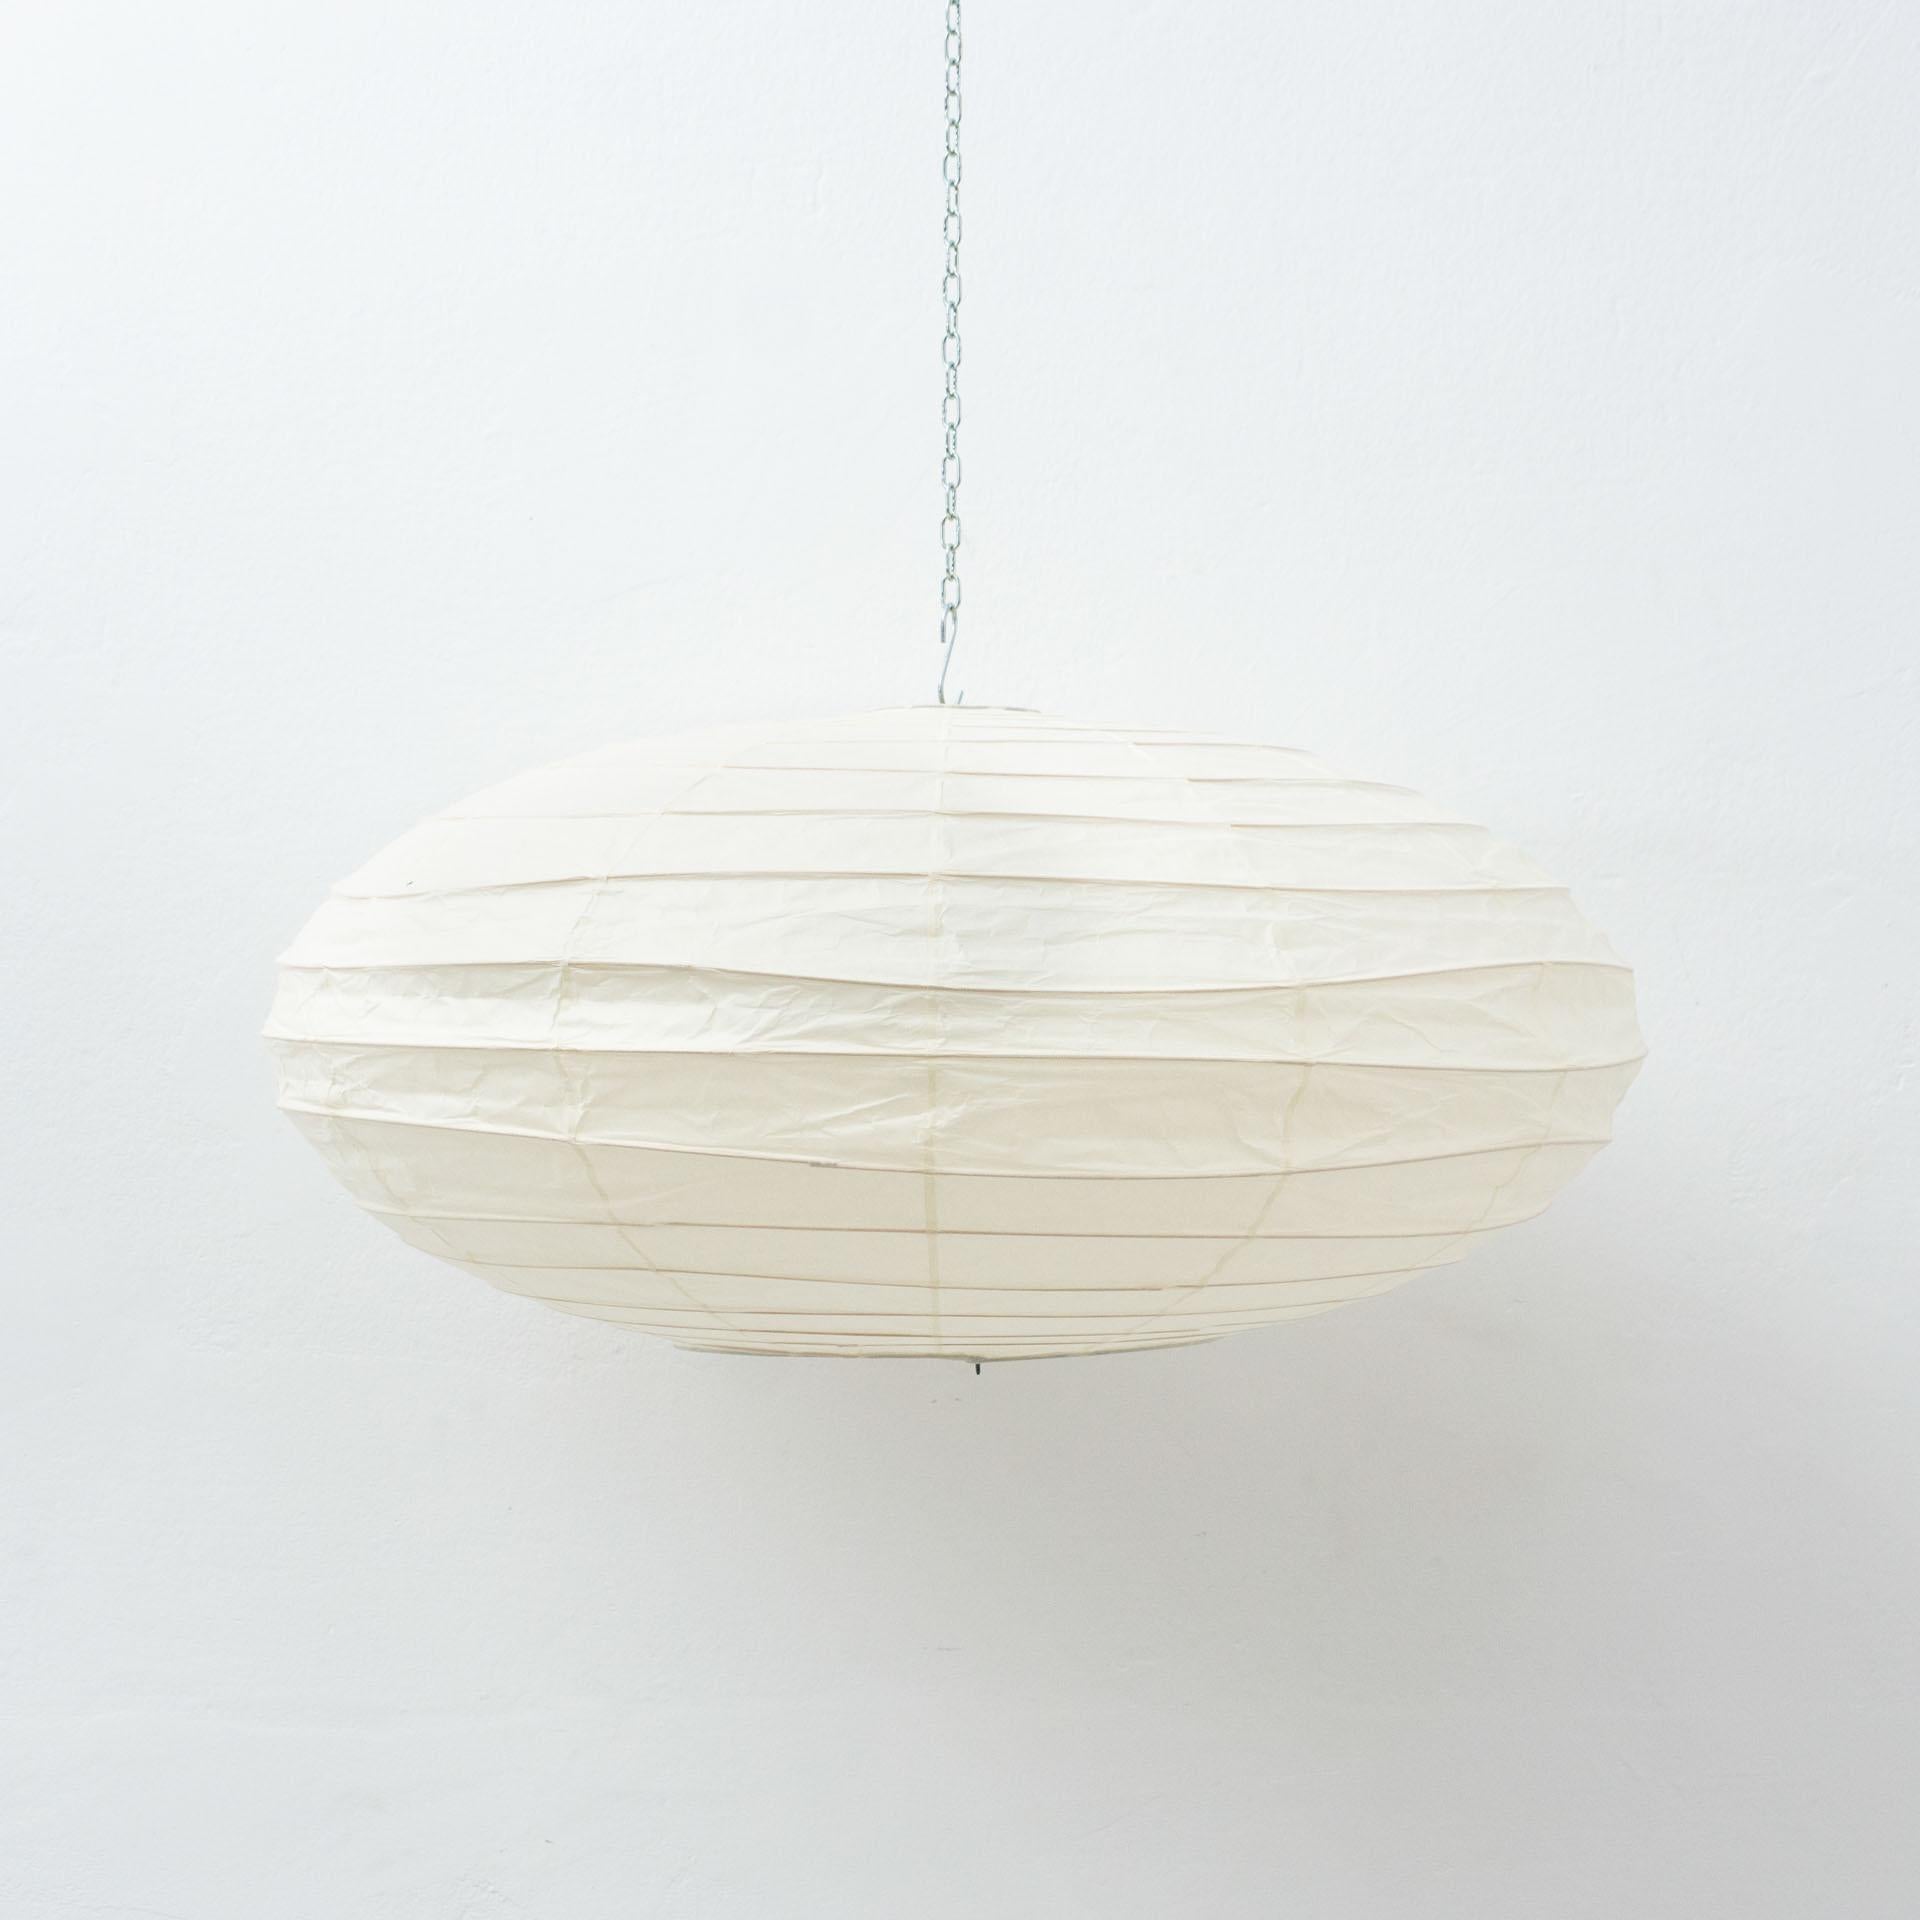 Pendant lamp model 70EN designed by Isamu Noguchi.
Manufactured by Ozeki & Company Ltd. (Japan.)
Bamboo ribbing structure covered by washi paper manufactured according to the traditional procedures.

In original condition, with minor wear